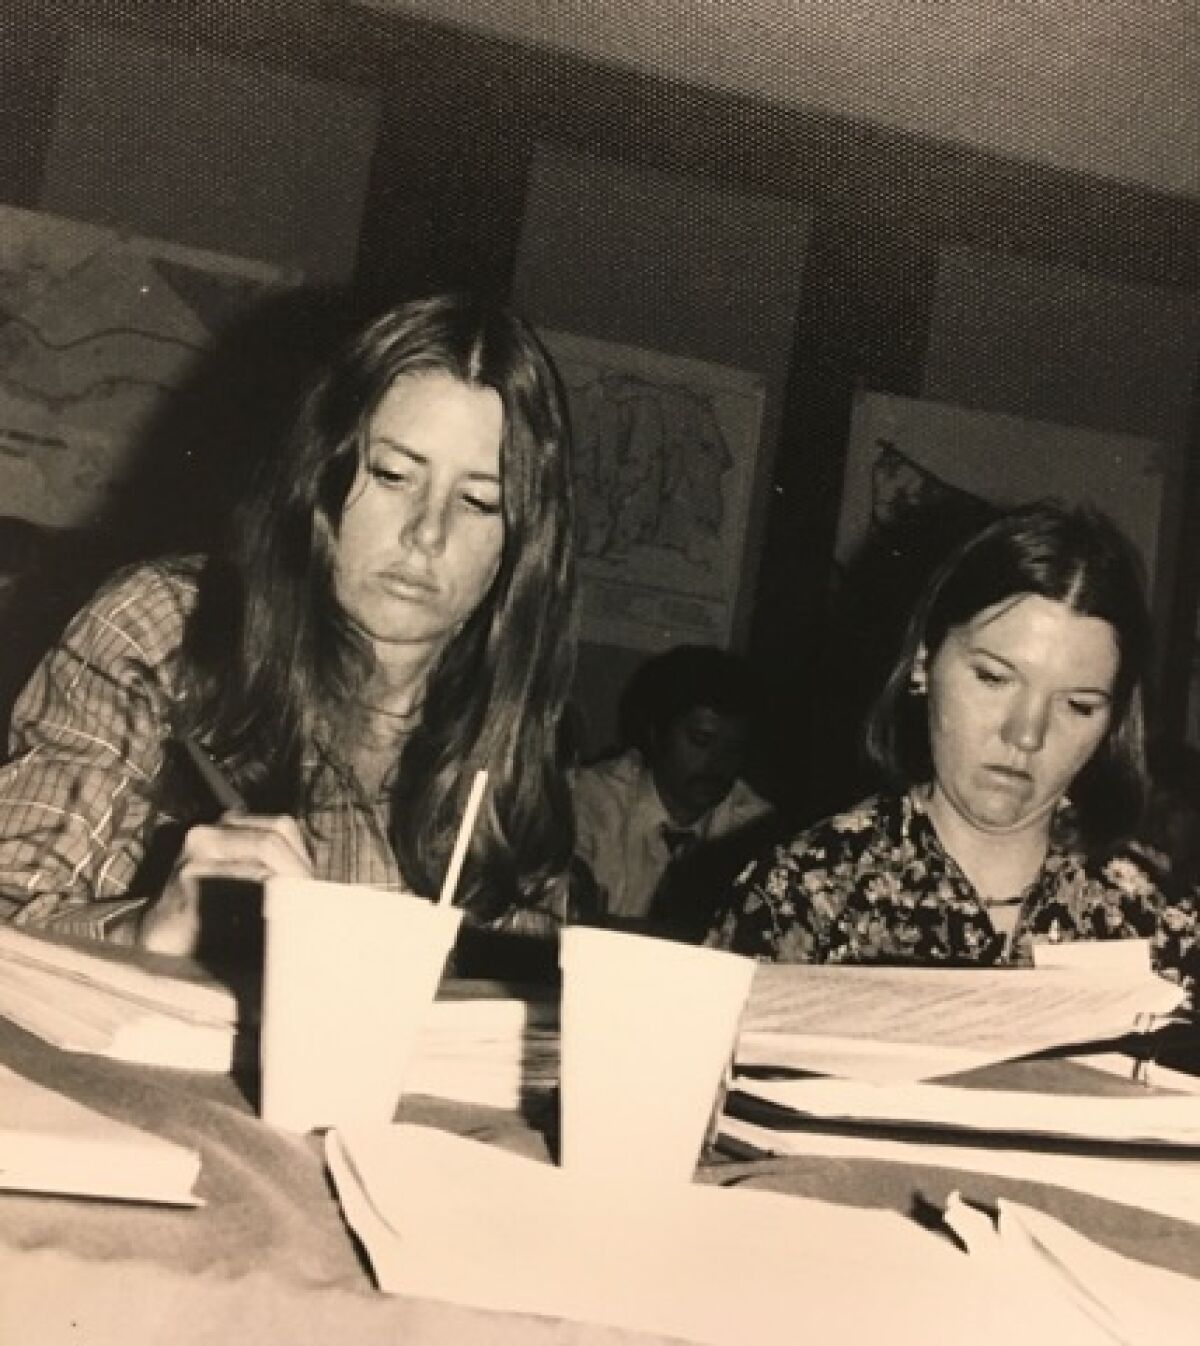 Susan Hansch, left, at a meeting in the 1970s with Charlotte Higgins, the coastal commission's press officer at the time.